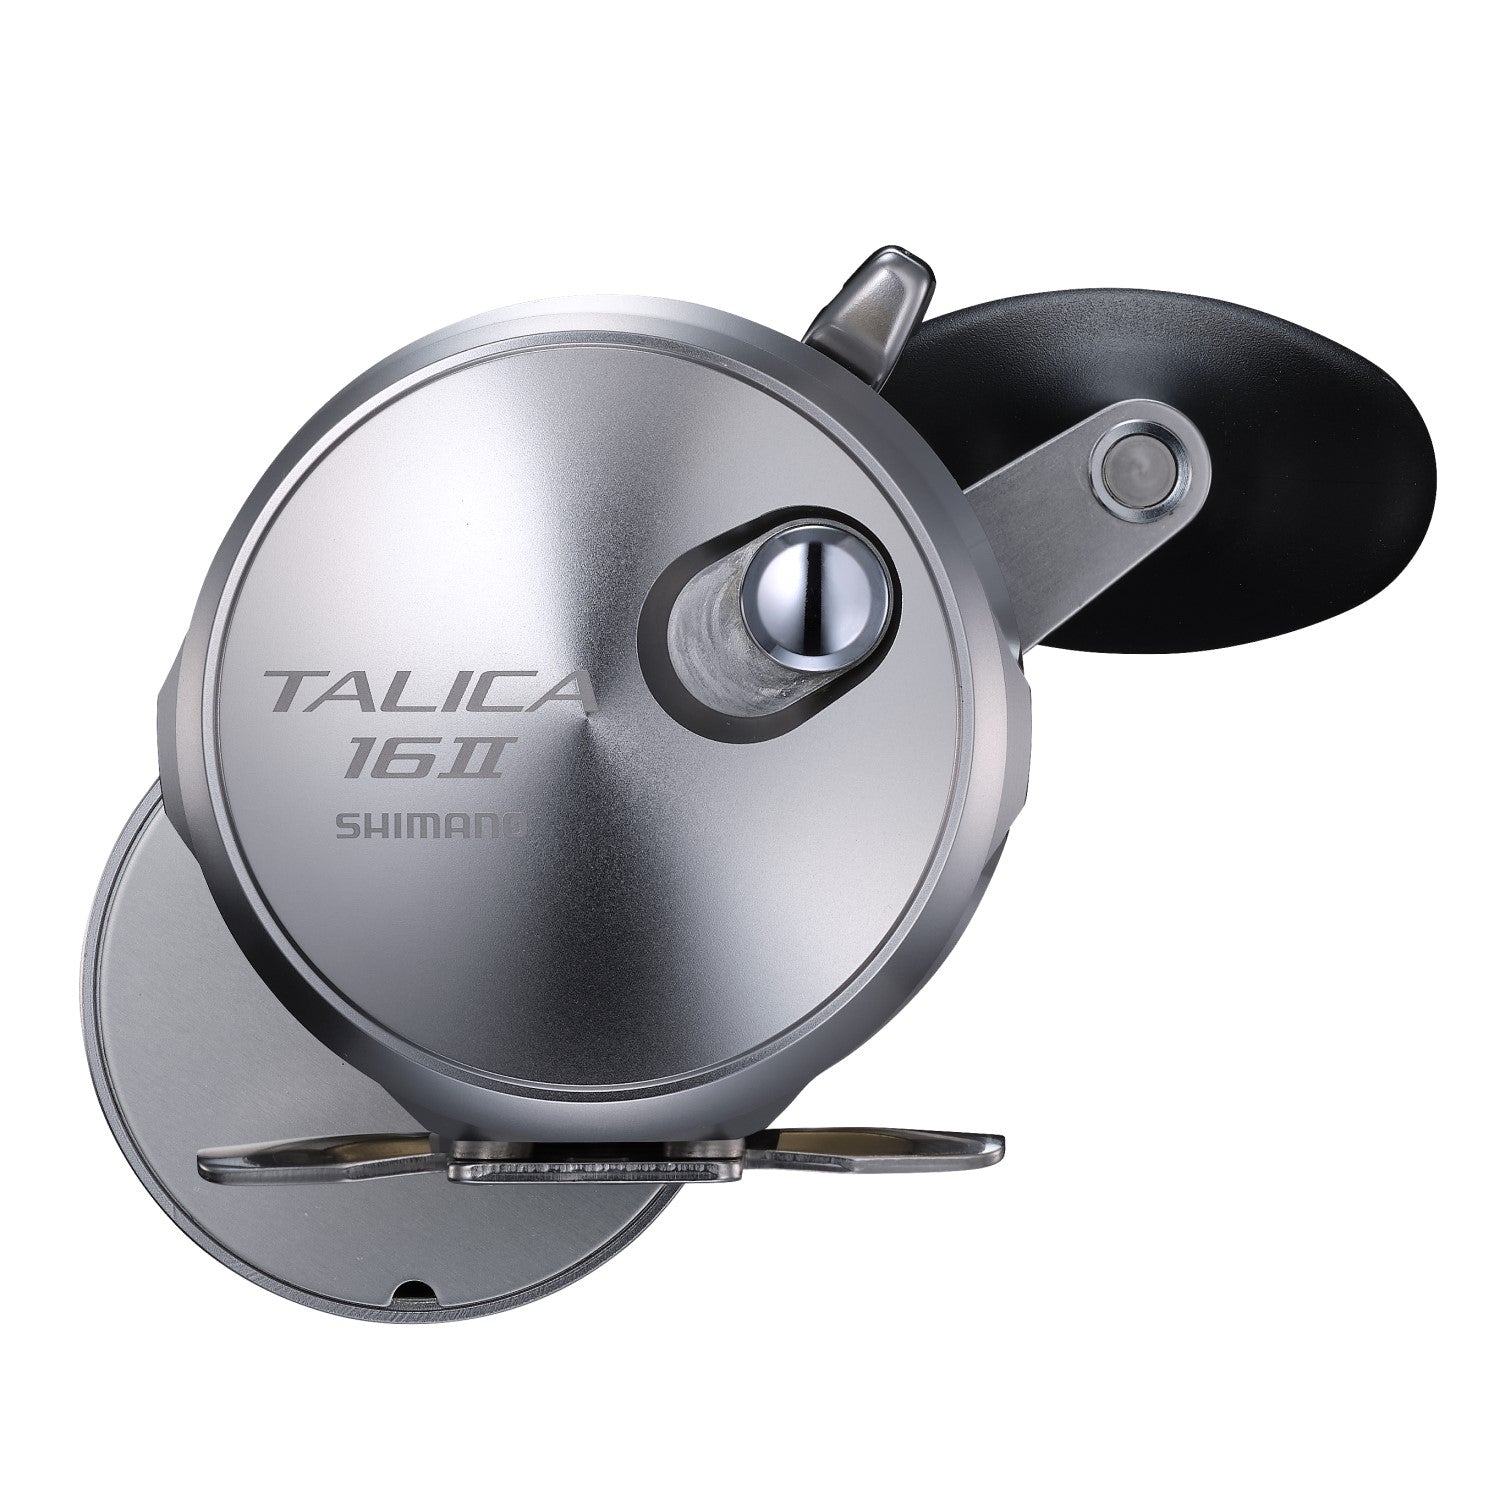 Shimano 23 Talica 2-Speed - Compleat Angler Nedlands Pro Tackle